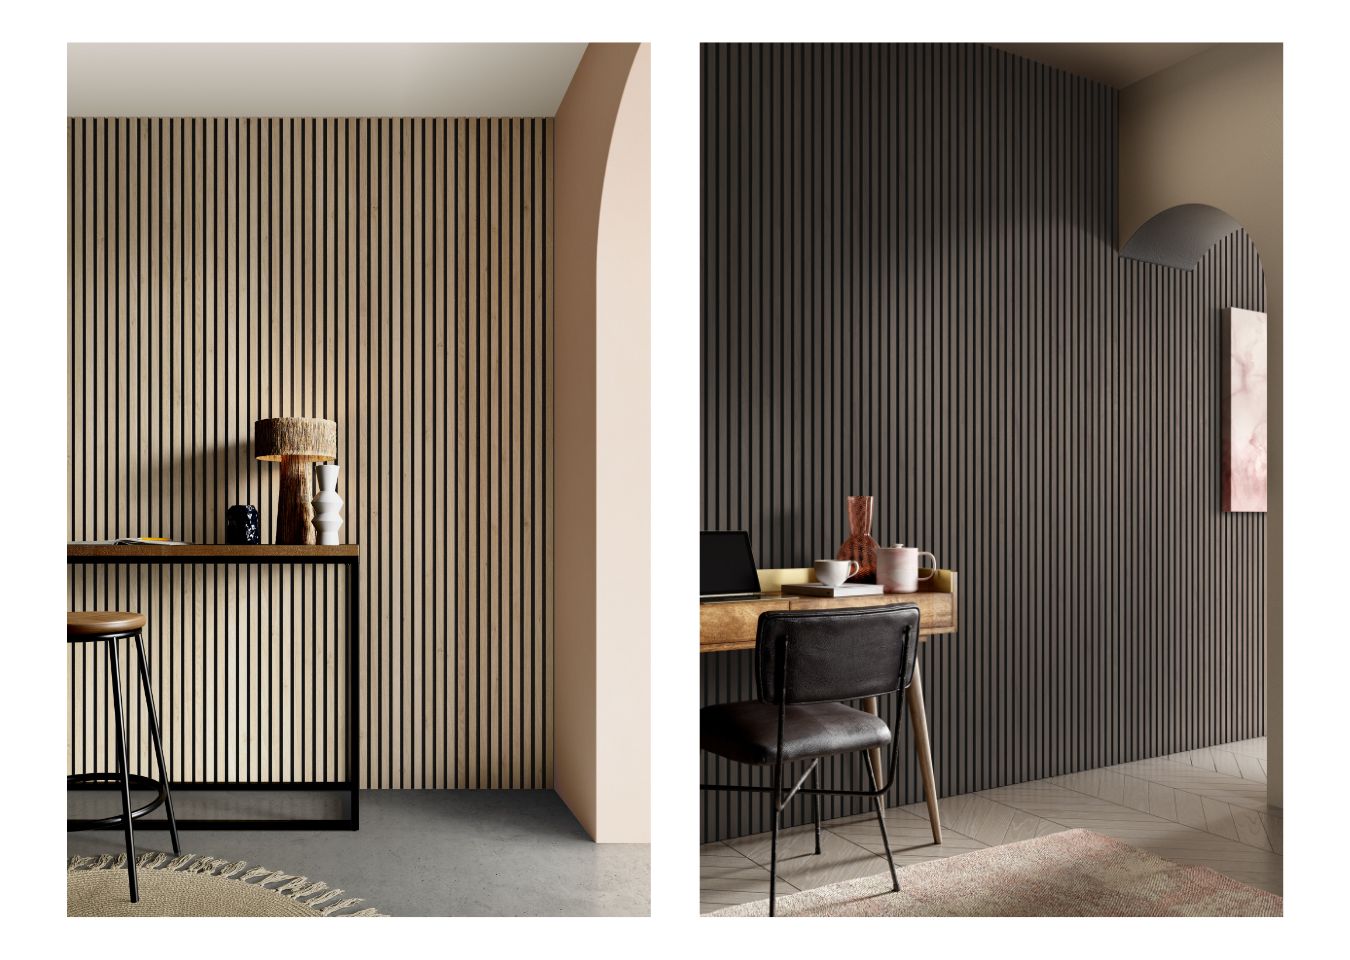 Two images, on the left shows Natural Oak SlatWall on the back wall with a side table in front, on the right shows Smoked Oak SlatWall on the back wall with a desk in front.